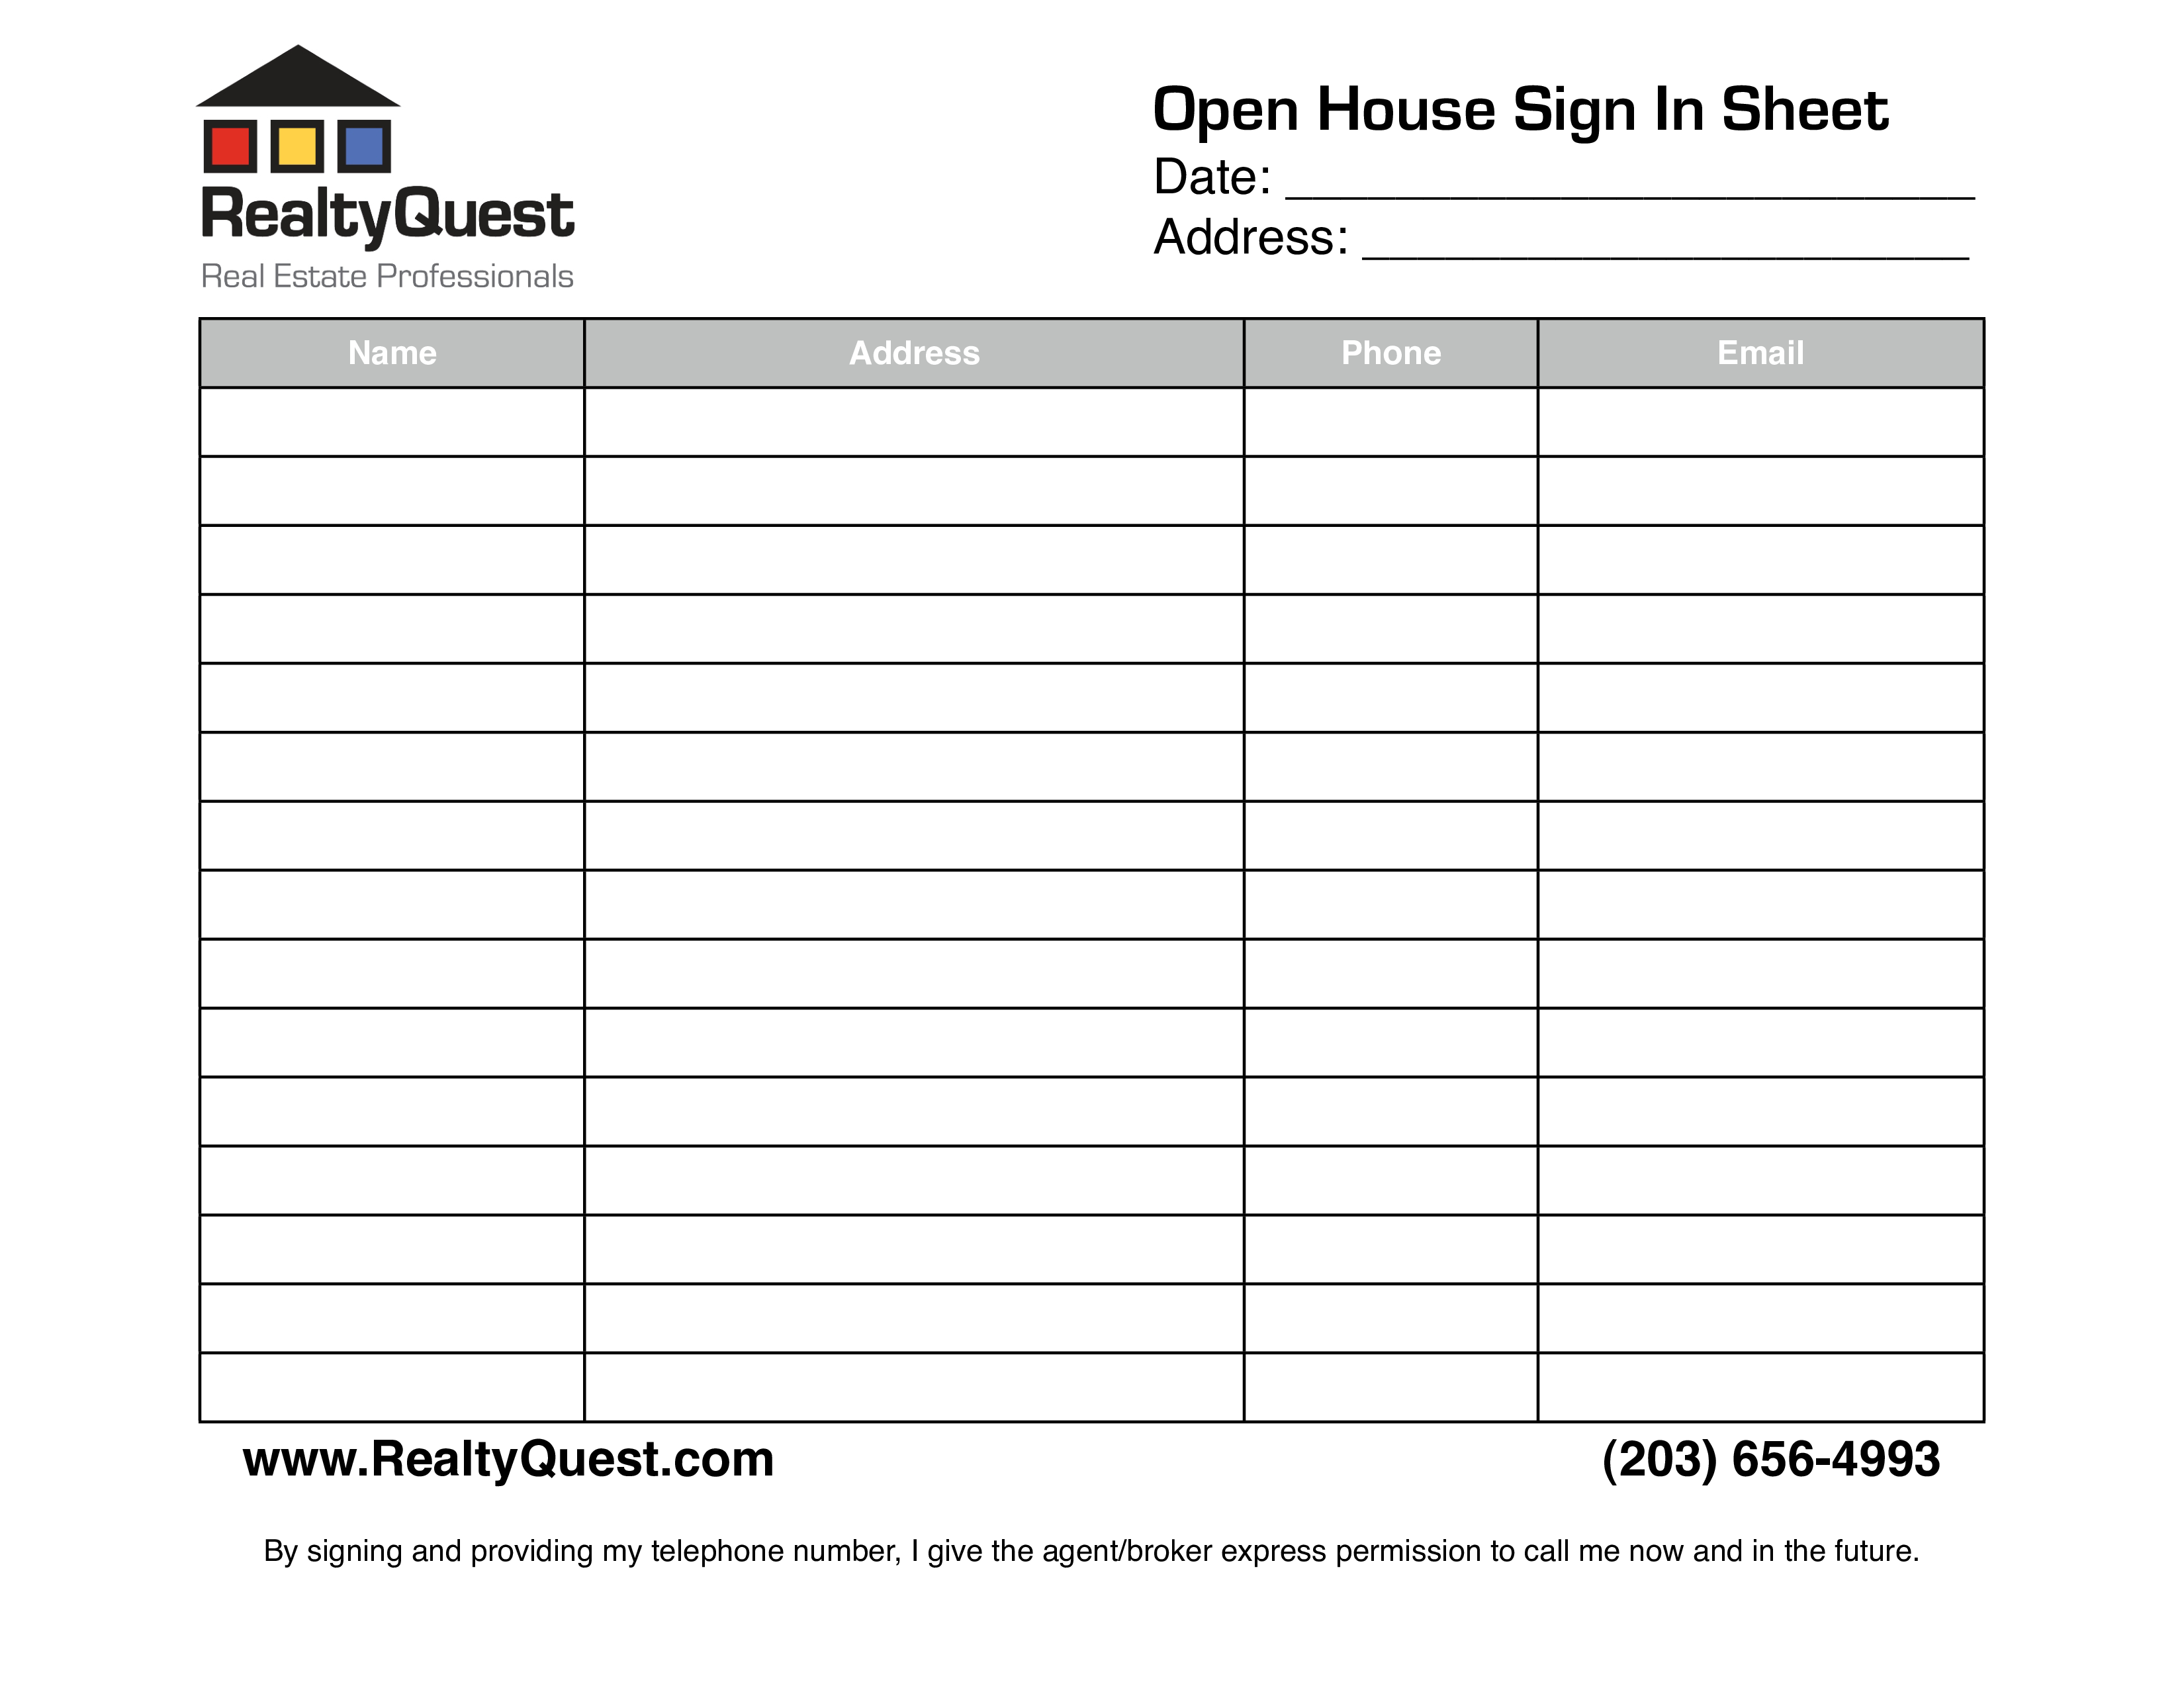 Real Estate Open House Sign In Sheet Free Download